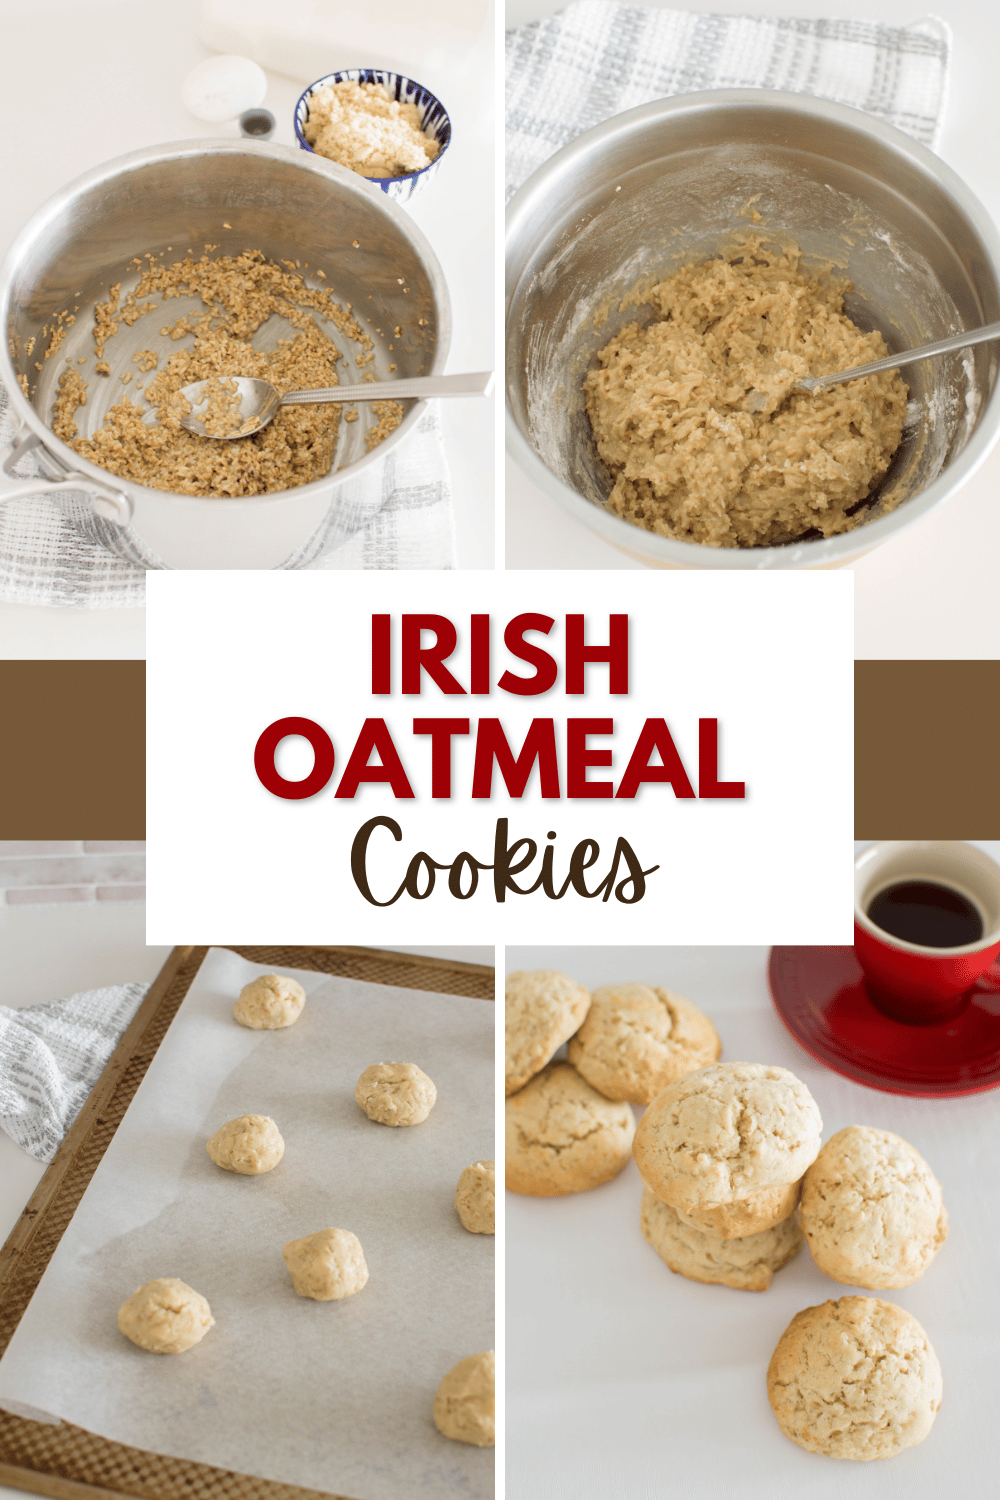 Irish Oatmeal Cookies are a classic recipe that have stood the test of time. They're slightly crispy on the outside with a chewy center. #irishoatmealcookies #irishoatmeal #oatmealcookies #stpatricksday #cookies via @wondermomwannab